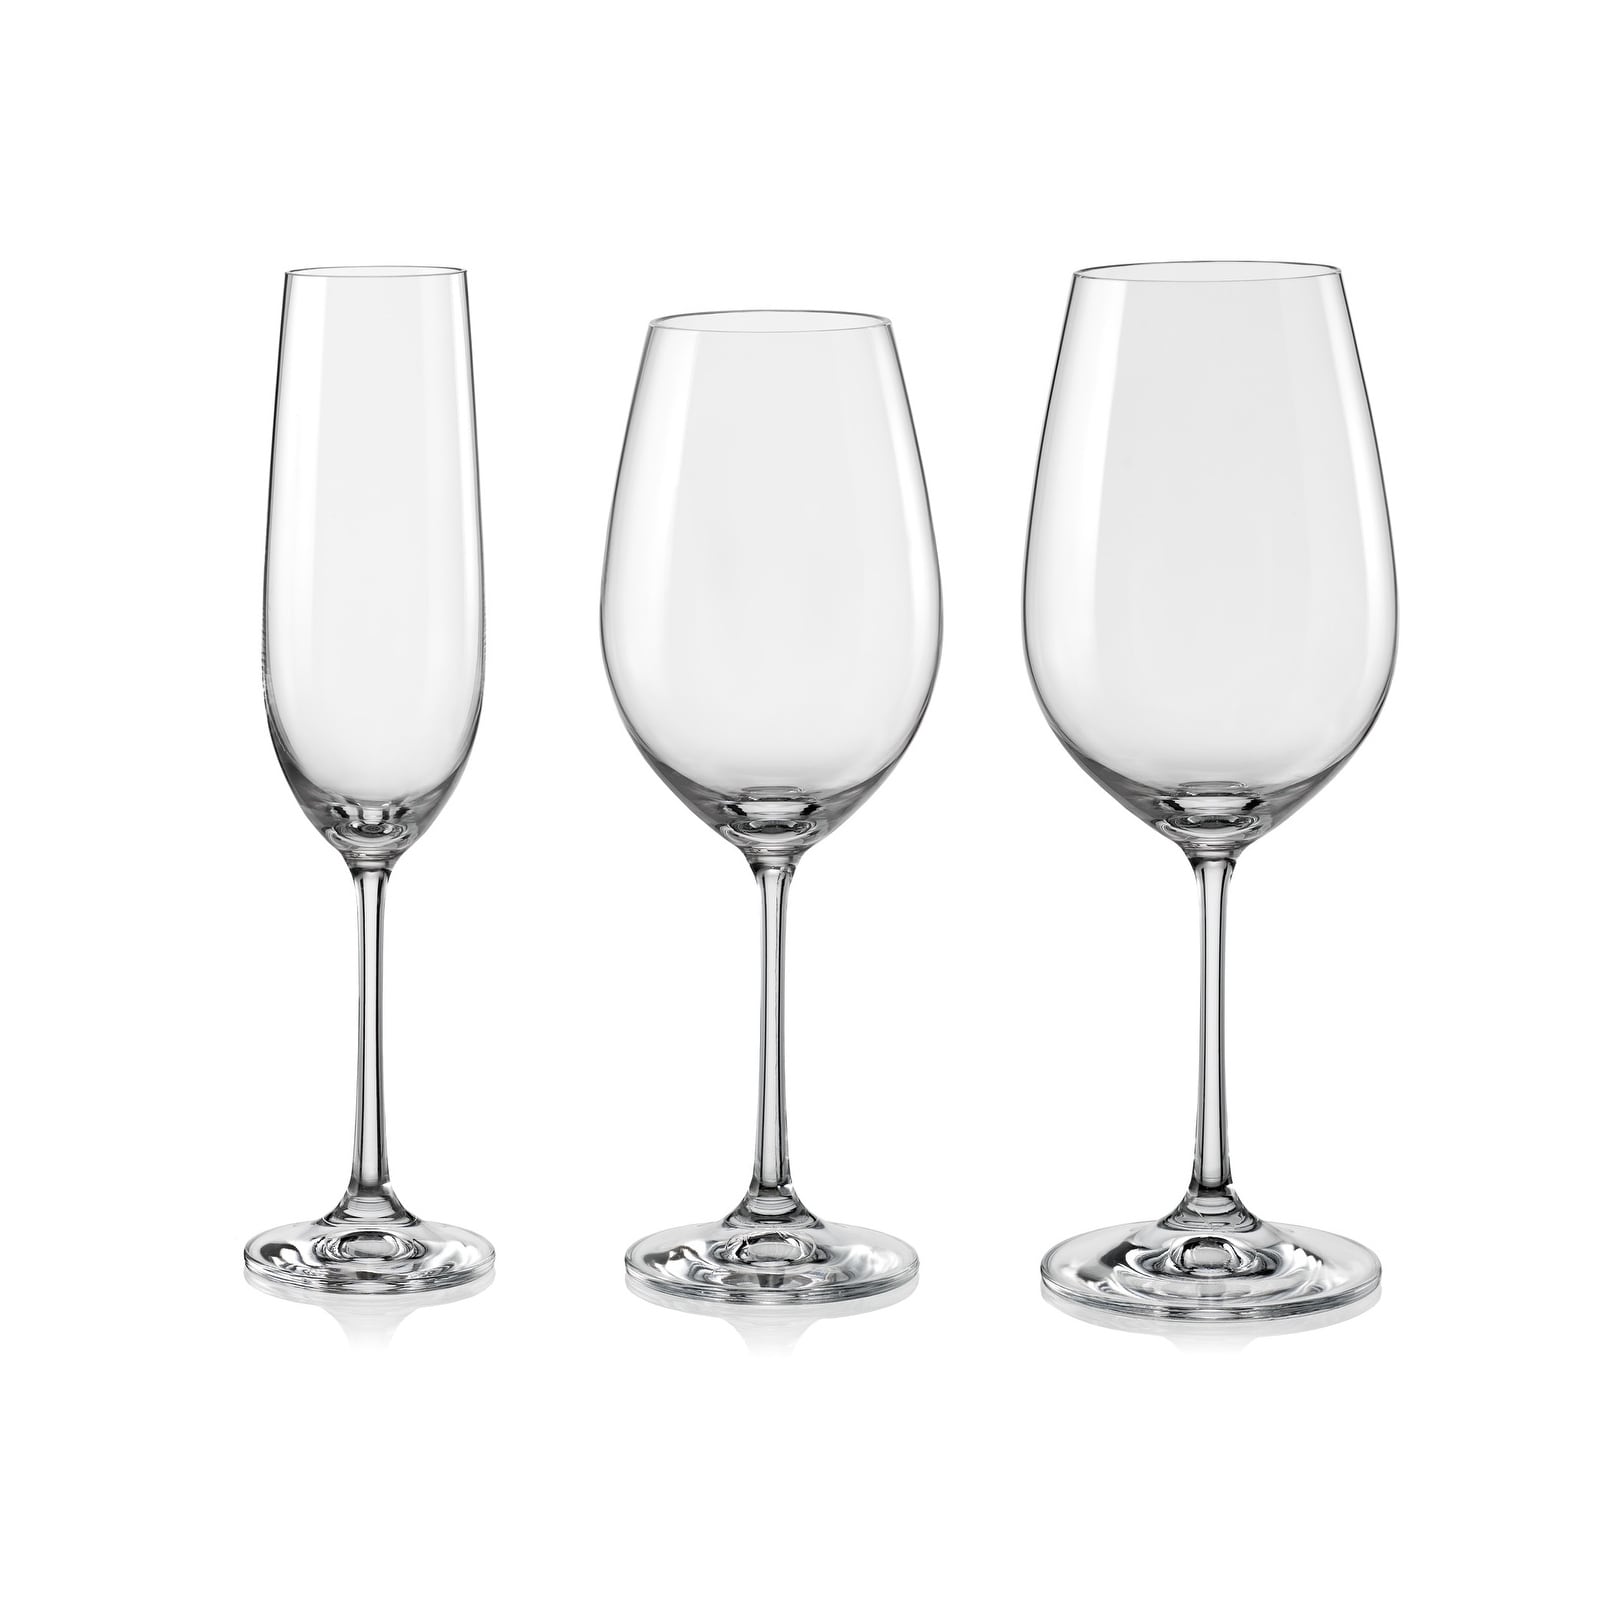 https://ak1.ostkcdn.com/images/products/is/images/direct/785d7c85df7f98681ffb31de497f02ec5f7d5d1e/Red-Vanilla-Viola-All-purpose-Wine-Glasses-%28Set-of-6%29.jpg